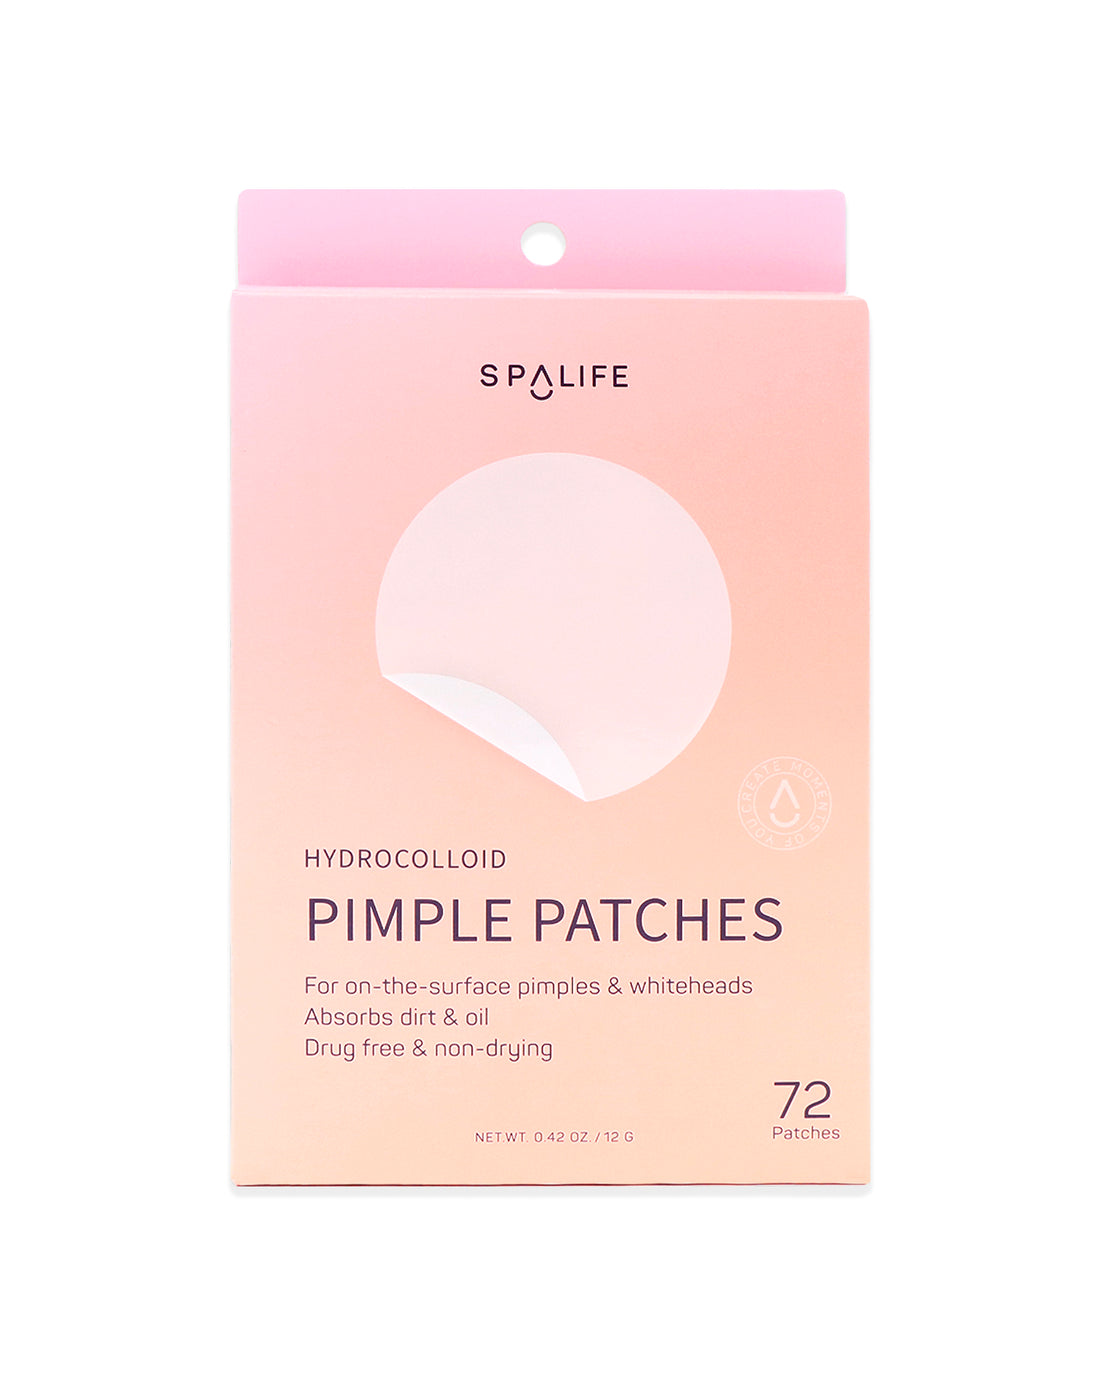 Hydrocolloid_pimple_patches_pa-525